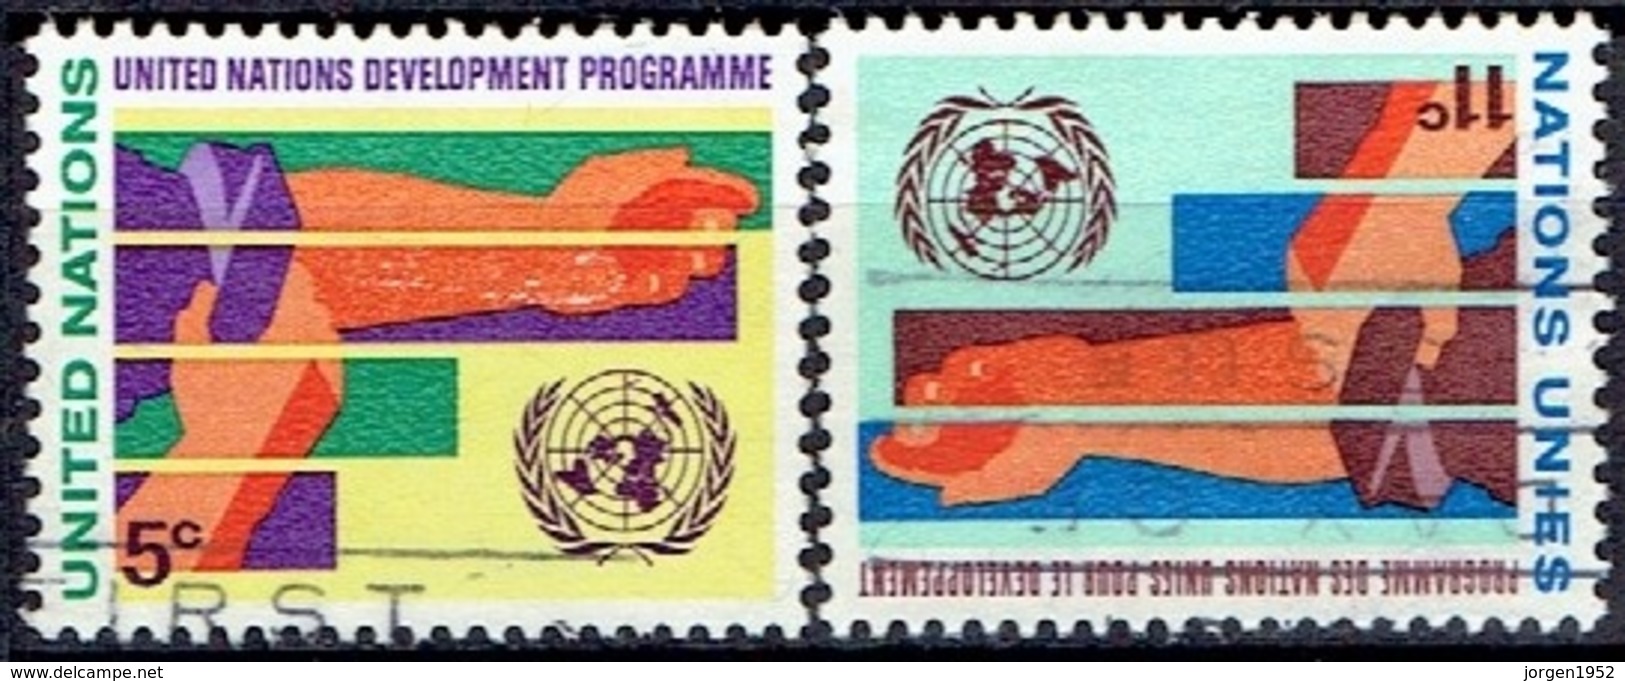 UNITED NATIONS # NEW YORK FROM 1967 STAMPWORLD 174-75 - Used Stamps